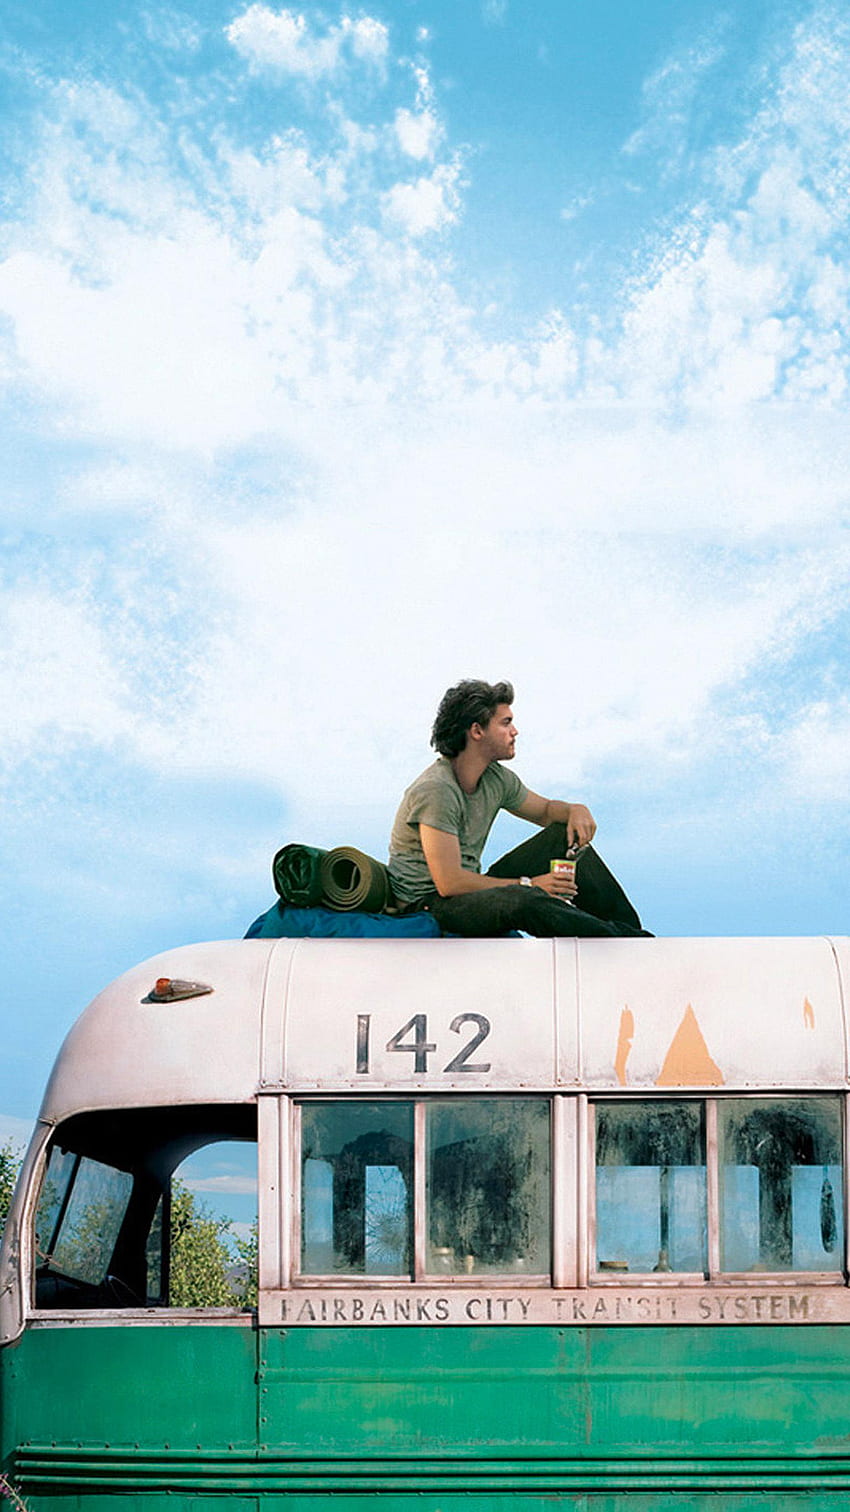 Into the Wild (2022) movie HD phone wallpaper